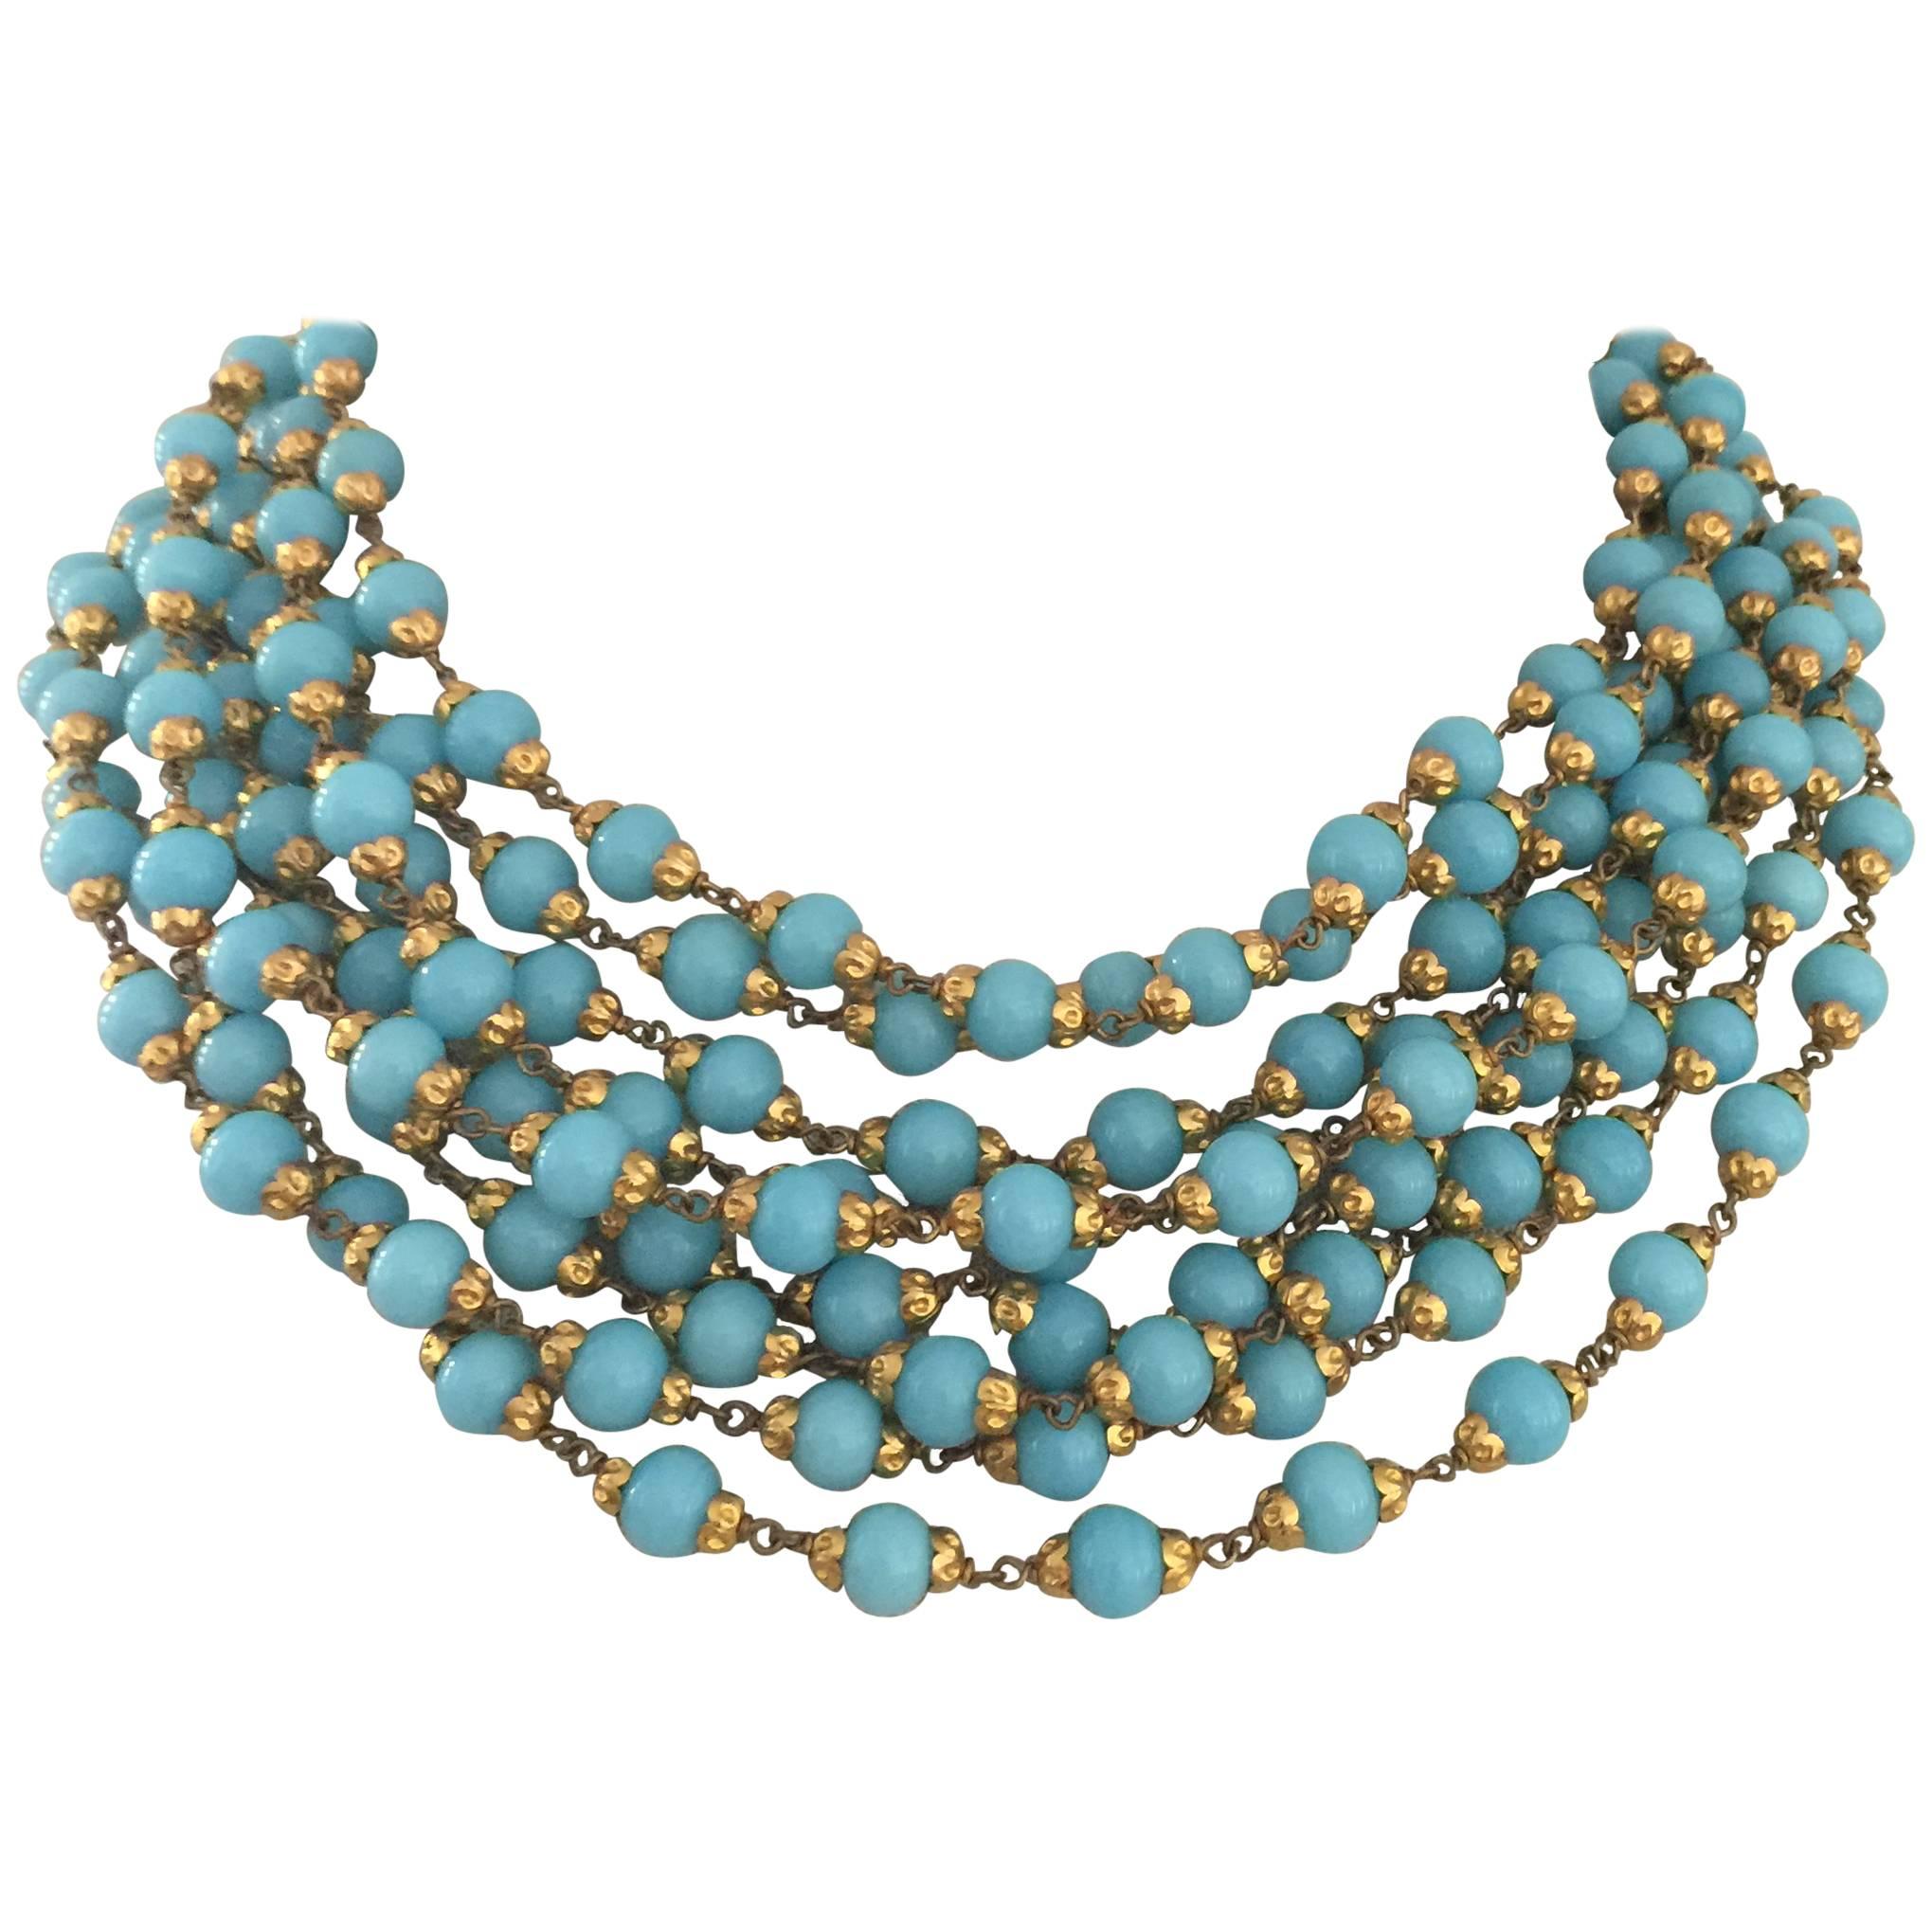 Stunning Turquoise Multi Strand Chanel Necklace